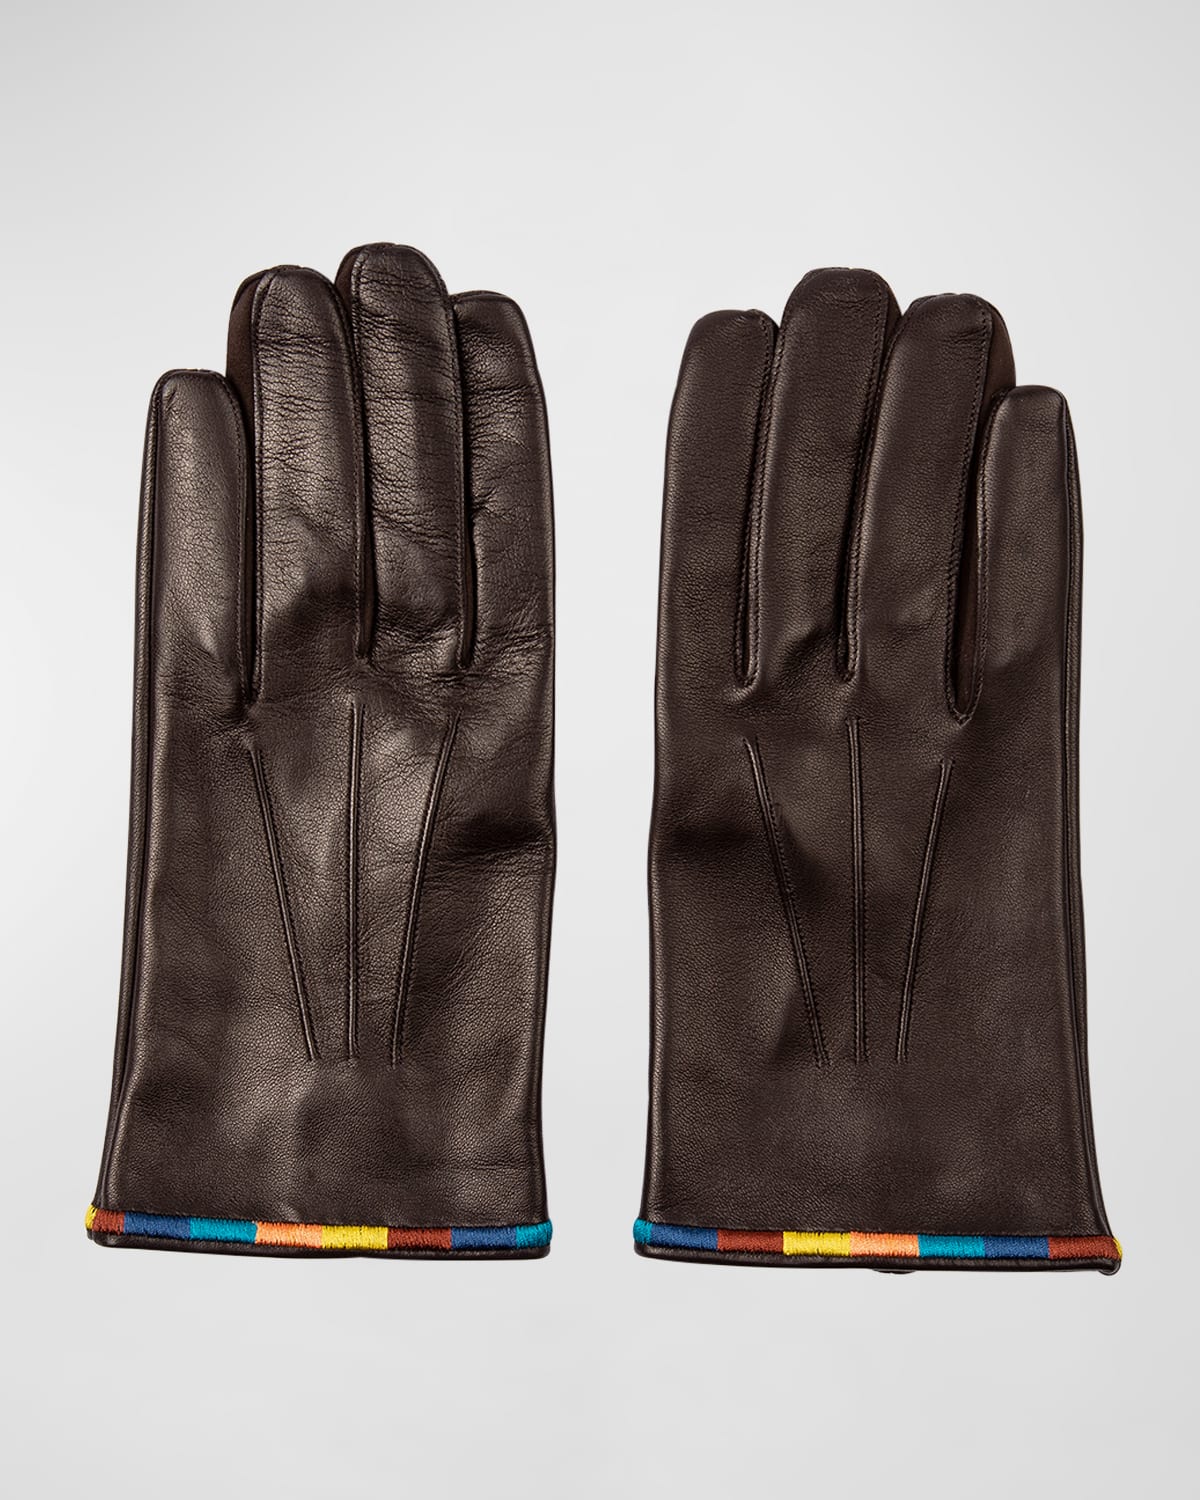 PAUL SMITH MEN'S EMBROIDERED STRIPE LEATHER GLOVES